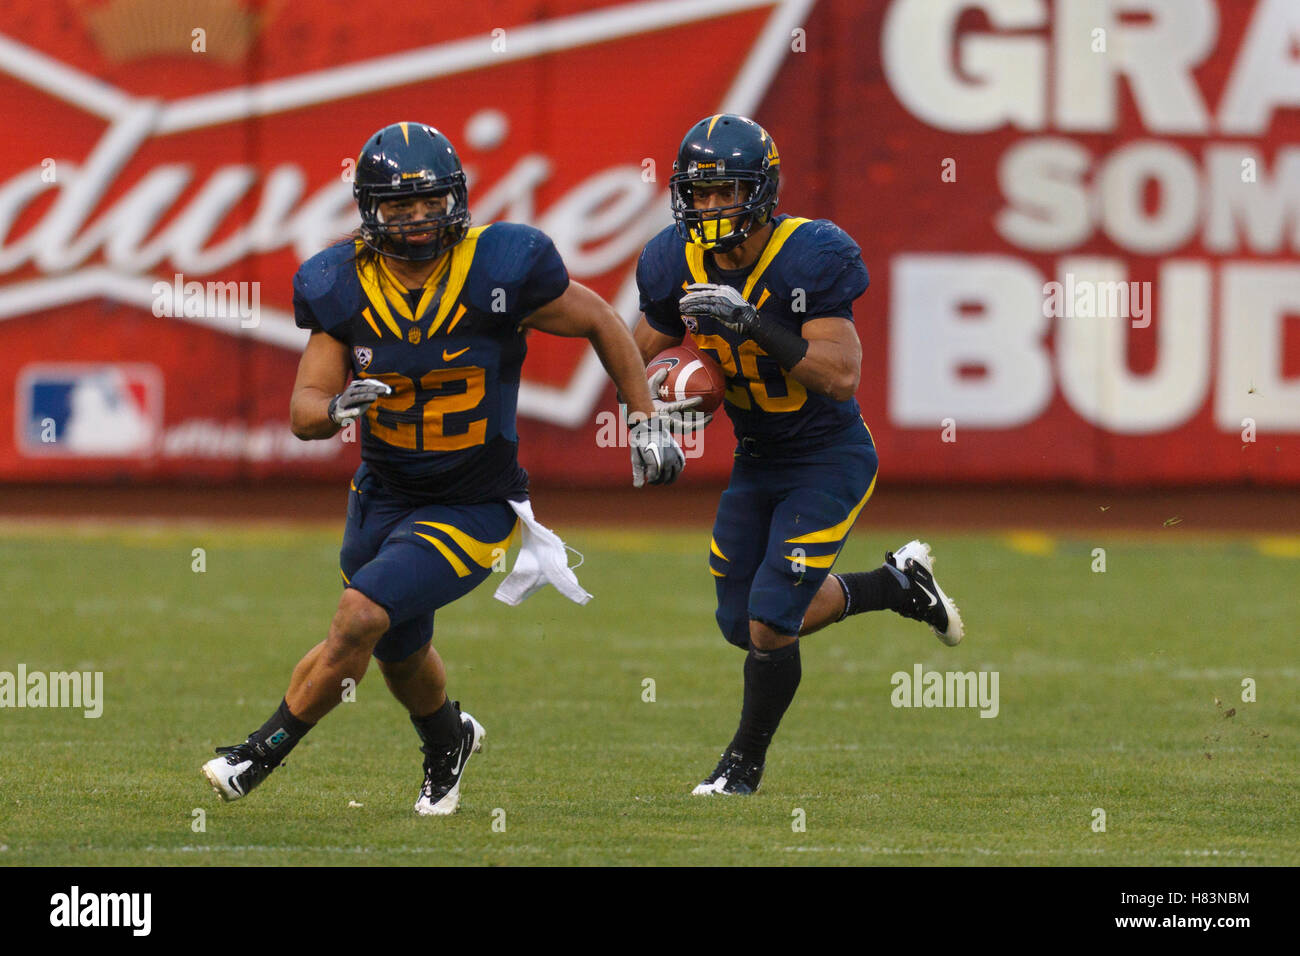 Nov 5, 2011; San Francisco CA, USA;  California Golden Bears running back Isi Sofele (20) rushes behind fullback Will Kapp (22) during the second quarter against the Washington State Cougars at AT&T Park.  California defeated Washington State 30-7. Stock Photo